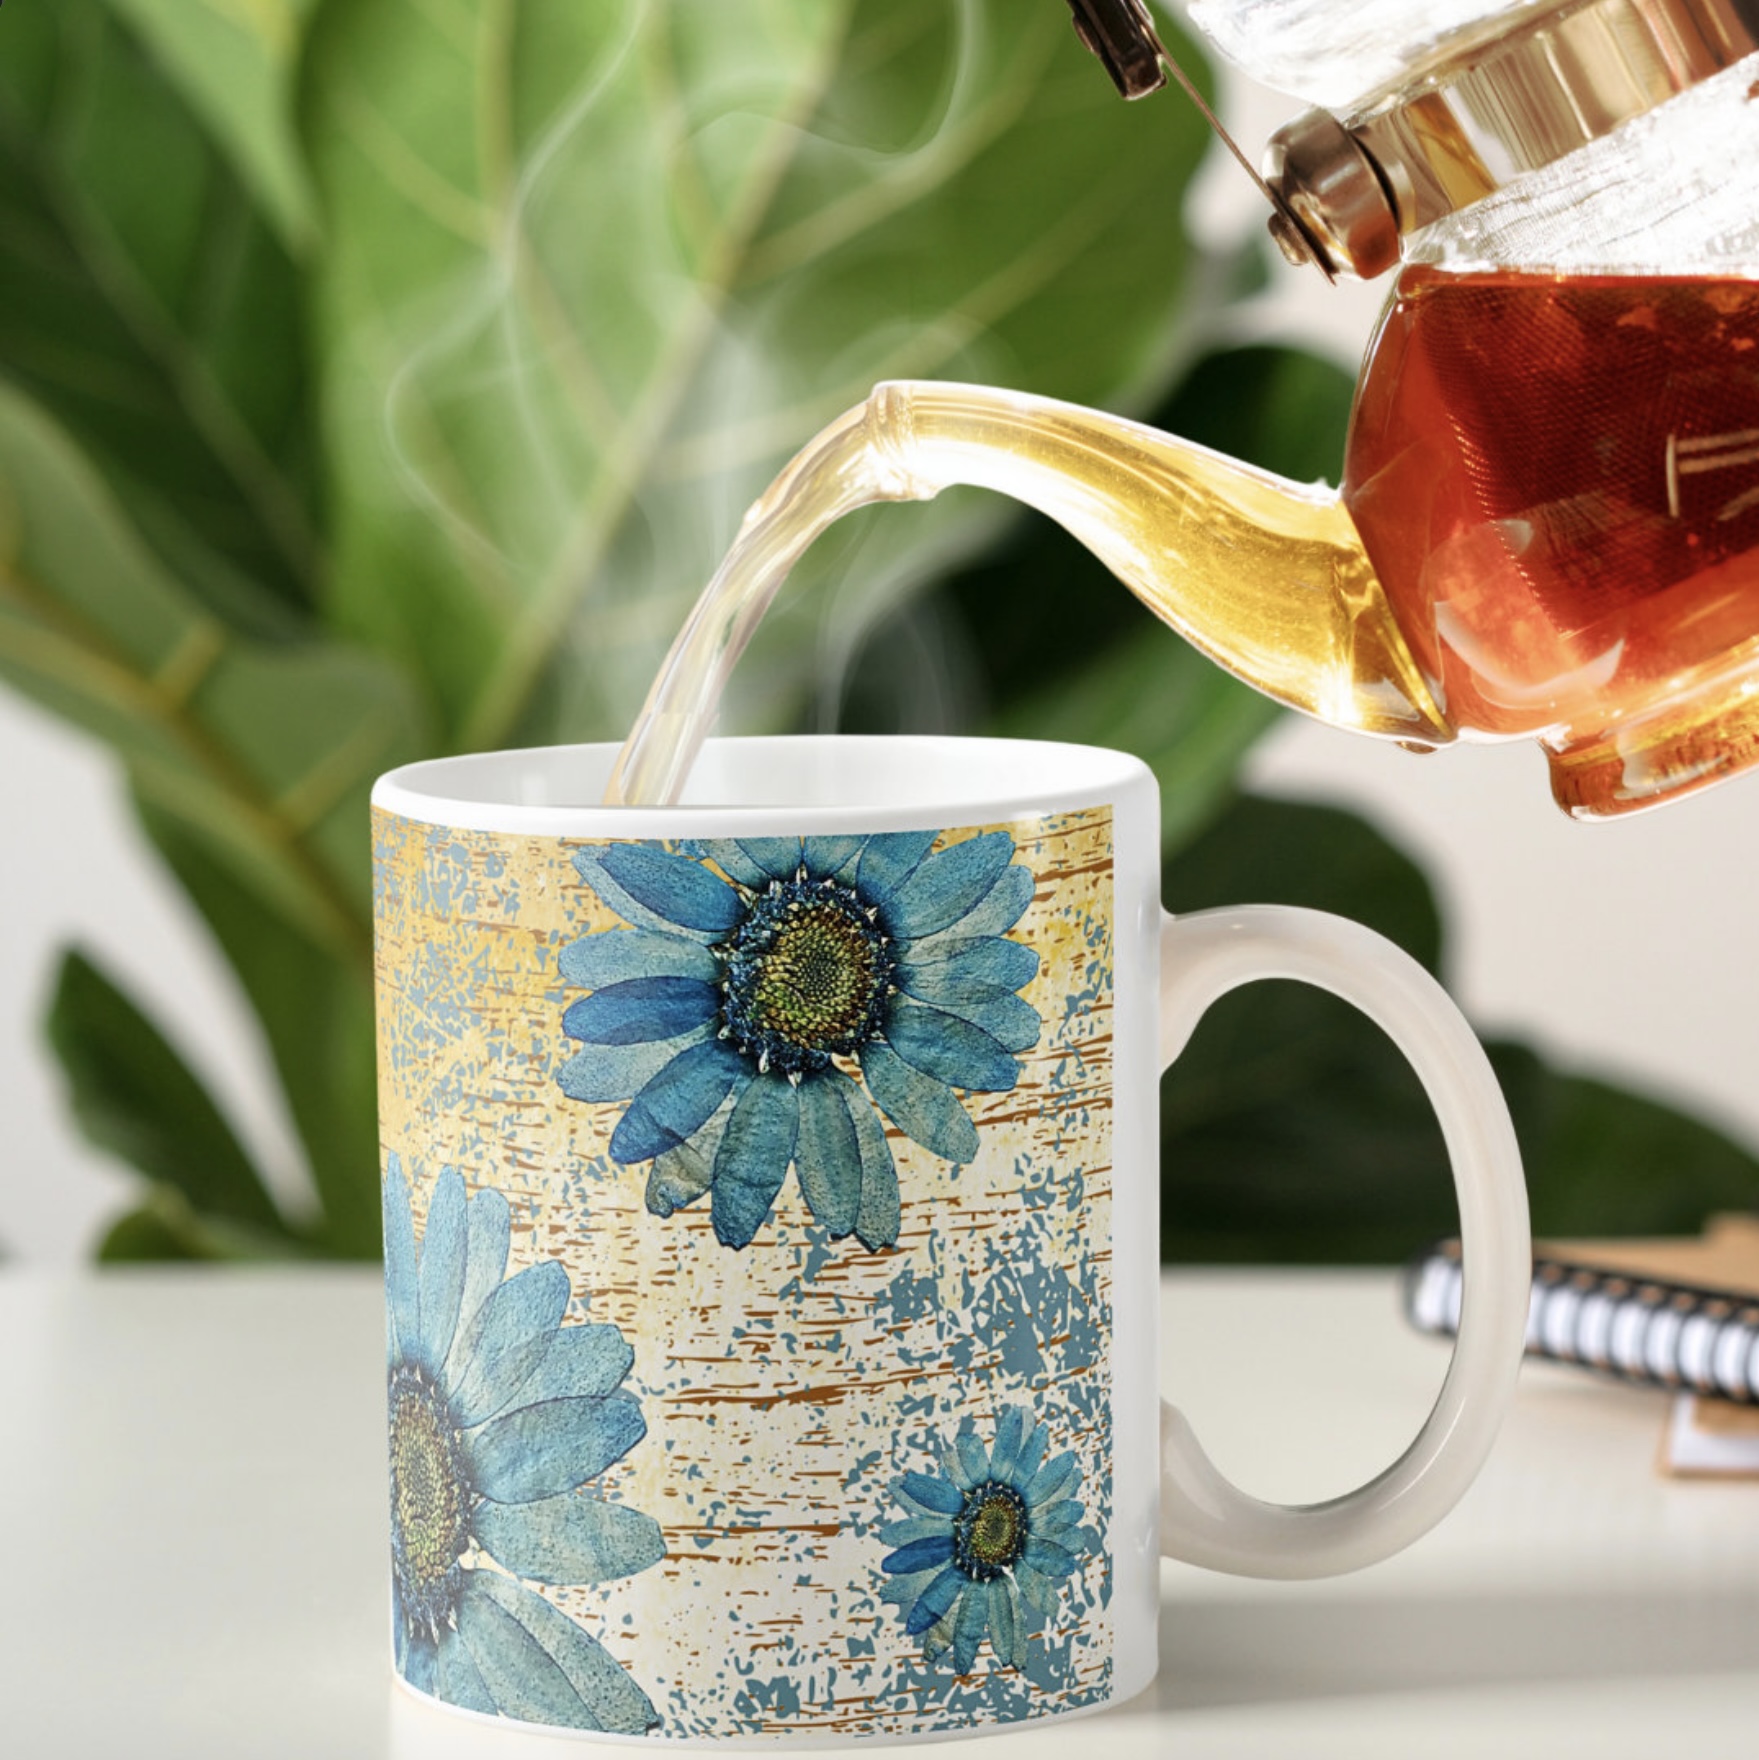 Serving hot coffee in a mug with blue gerberas images on a yellow ochre washed out background. 